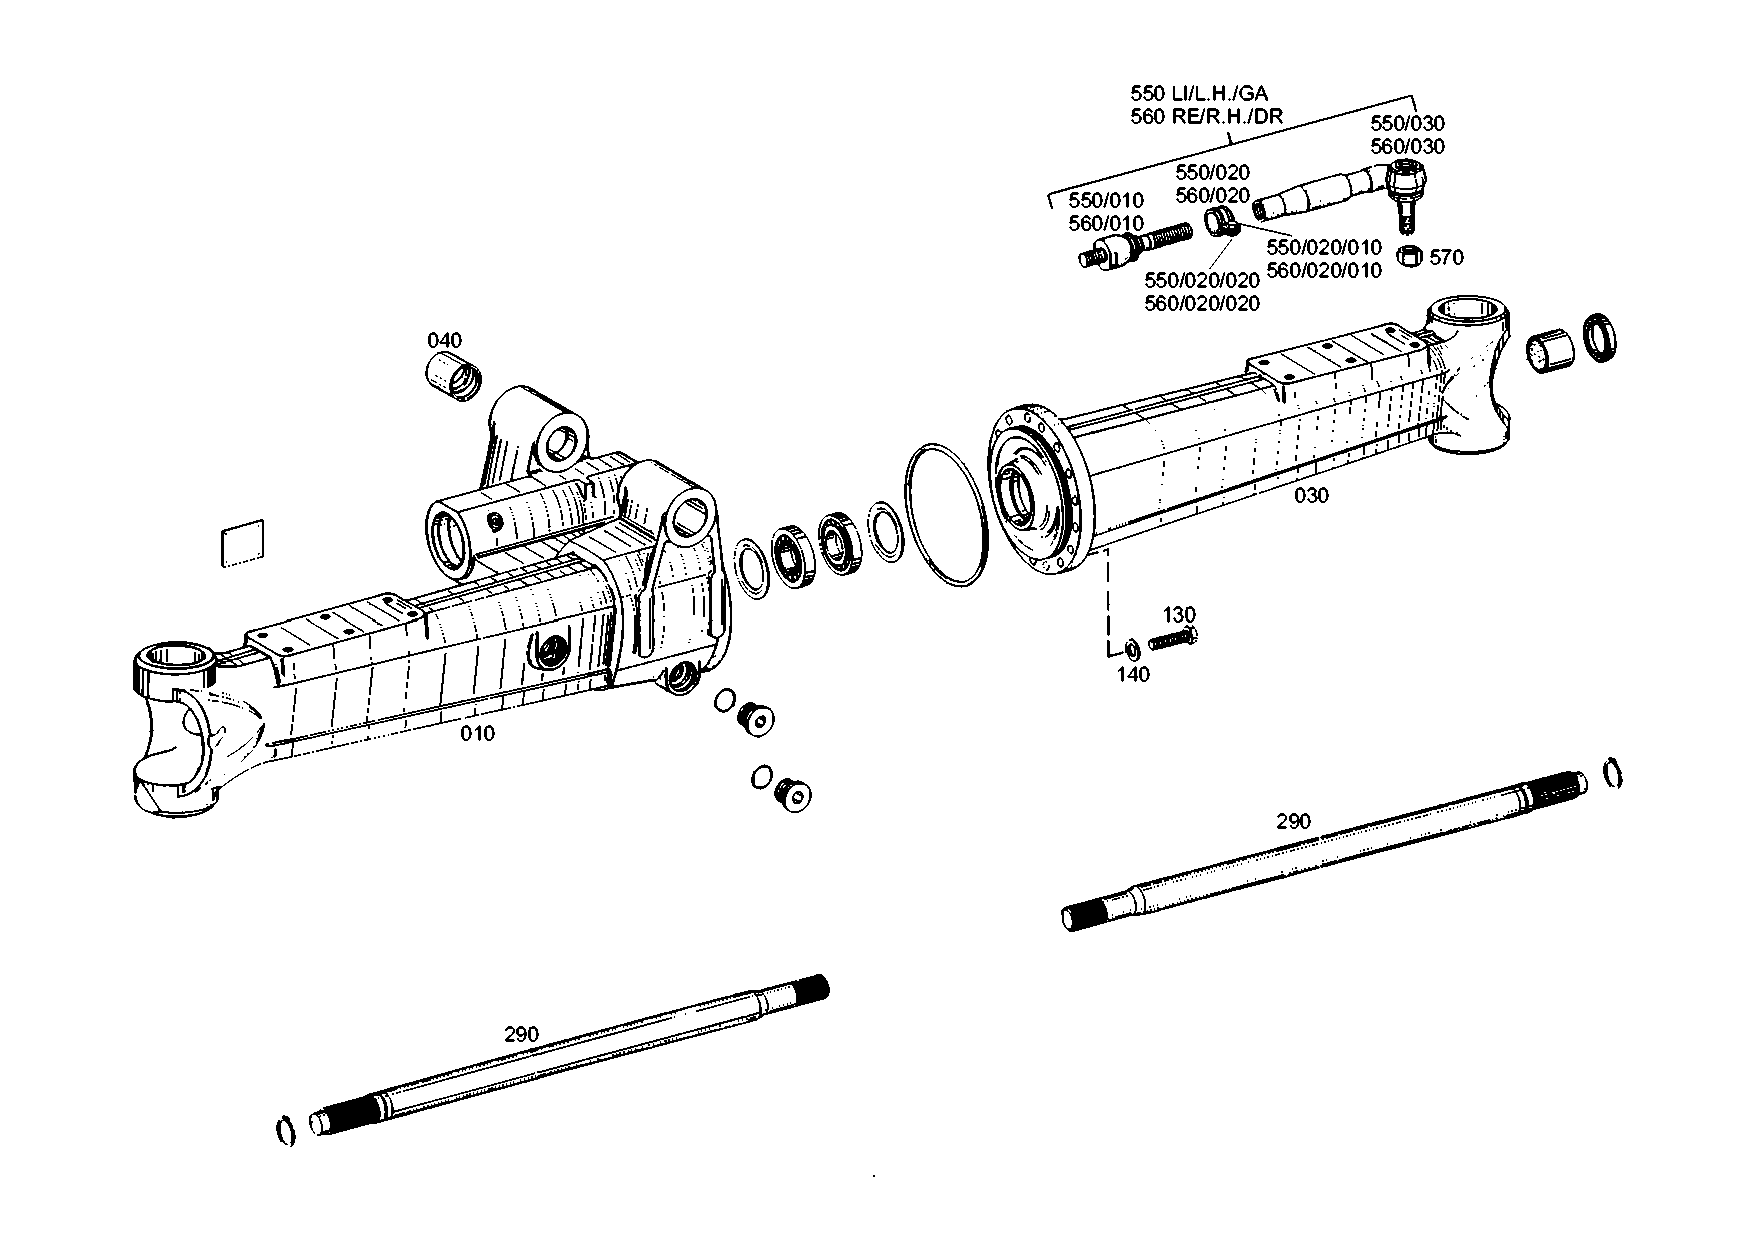 drawing for LIEBHERR GMBH 7027750 - TIE ROD (figure 4)